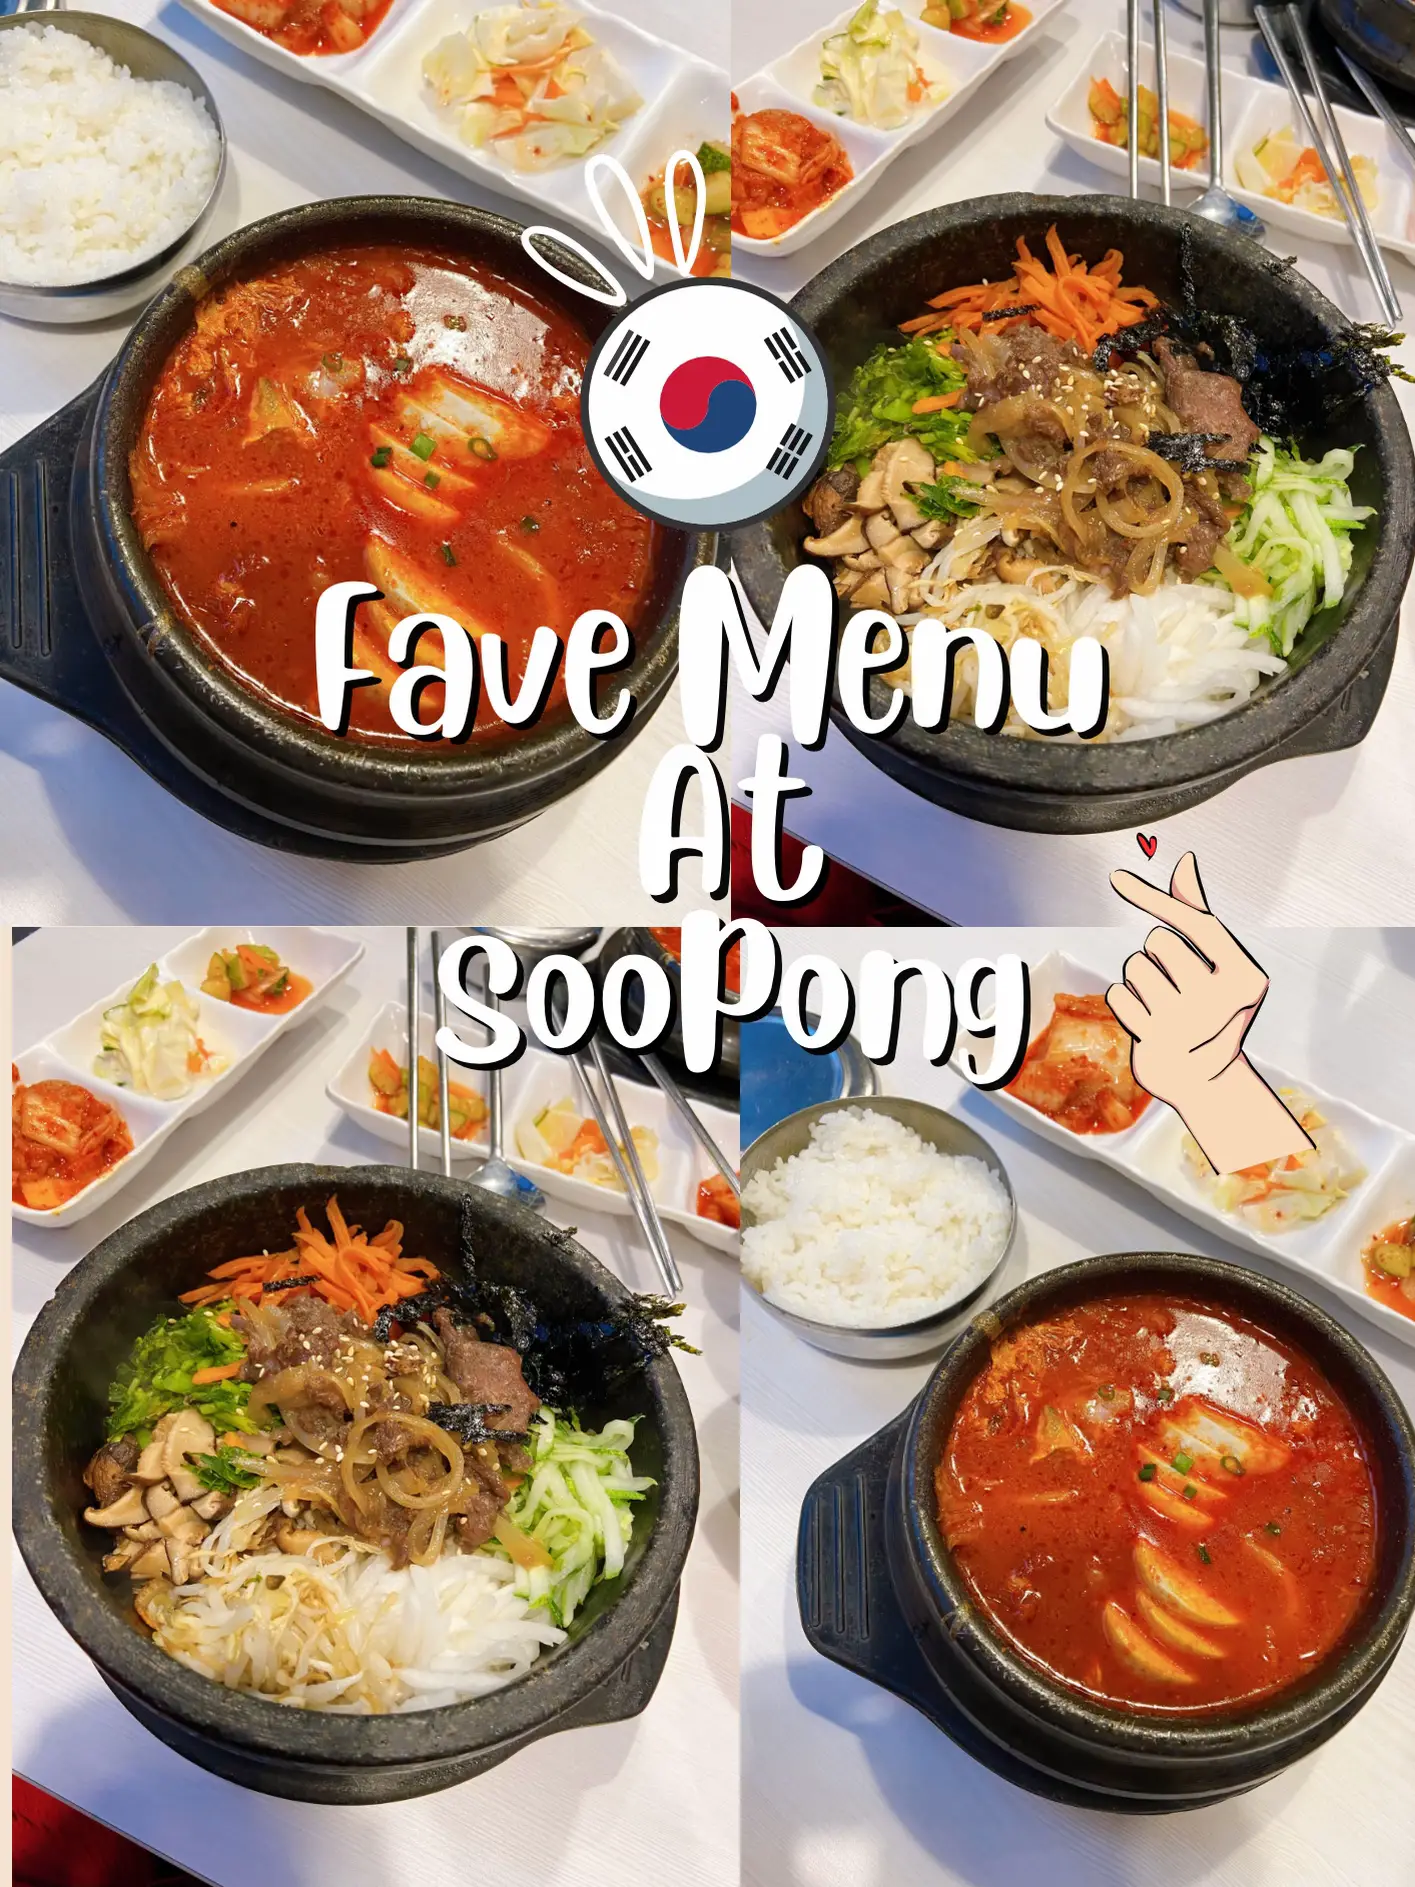 Sharon Korean Kitchen - CRAVING FOR GREAT KOREAN FOOD? HERE IS THE